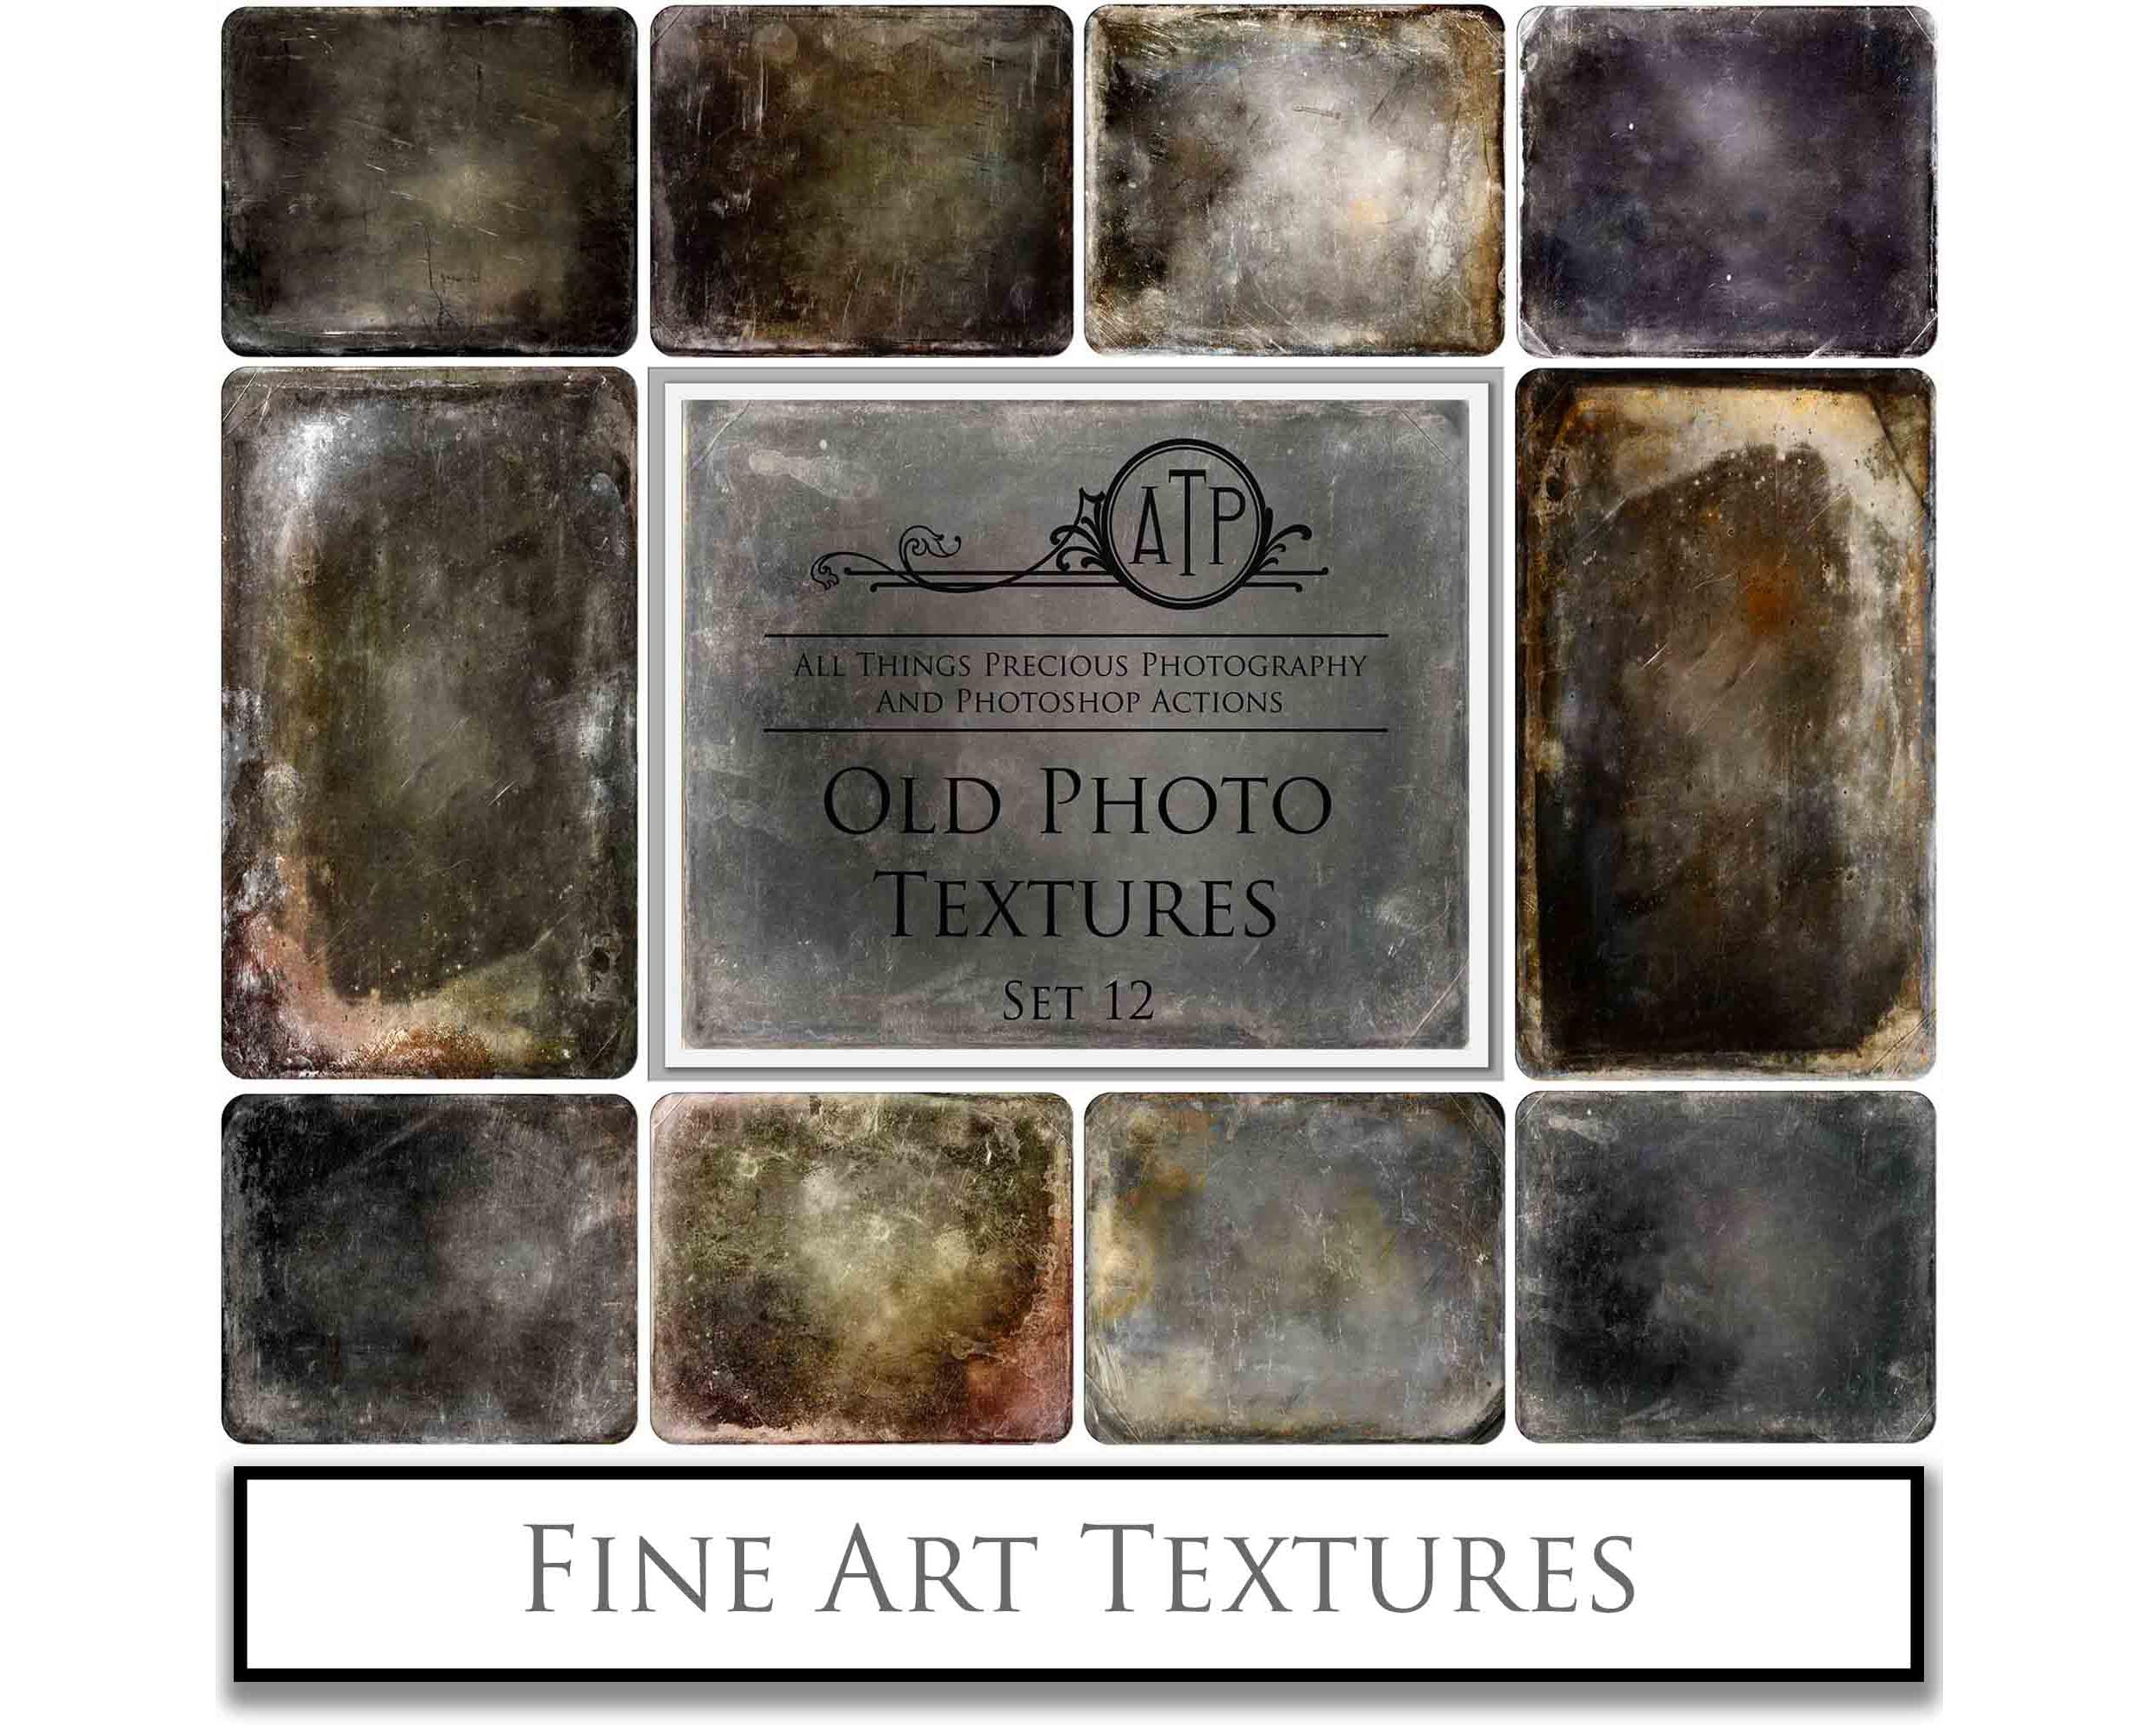 Old Photo Textures Frame. Tintype  Digital Backdrop. Fine art texture for photographers. Photo Overlays. Antique, Old World, Grunge, Abstract wall decor bundle. Textured Background. Printable backdrop, Print Bundle. High resolution, 300dpi Graphic Assets for photography, scrapbooking, design. By ATP Textures